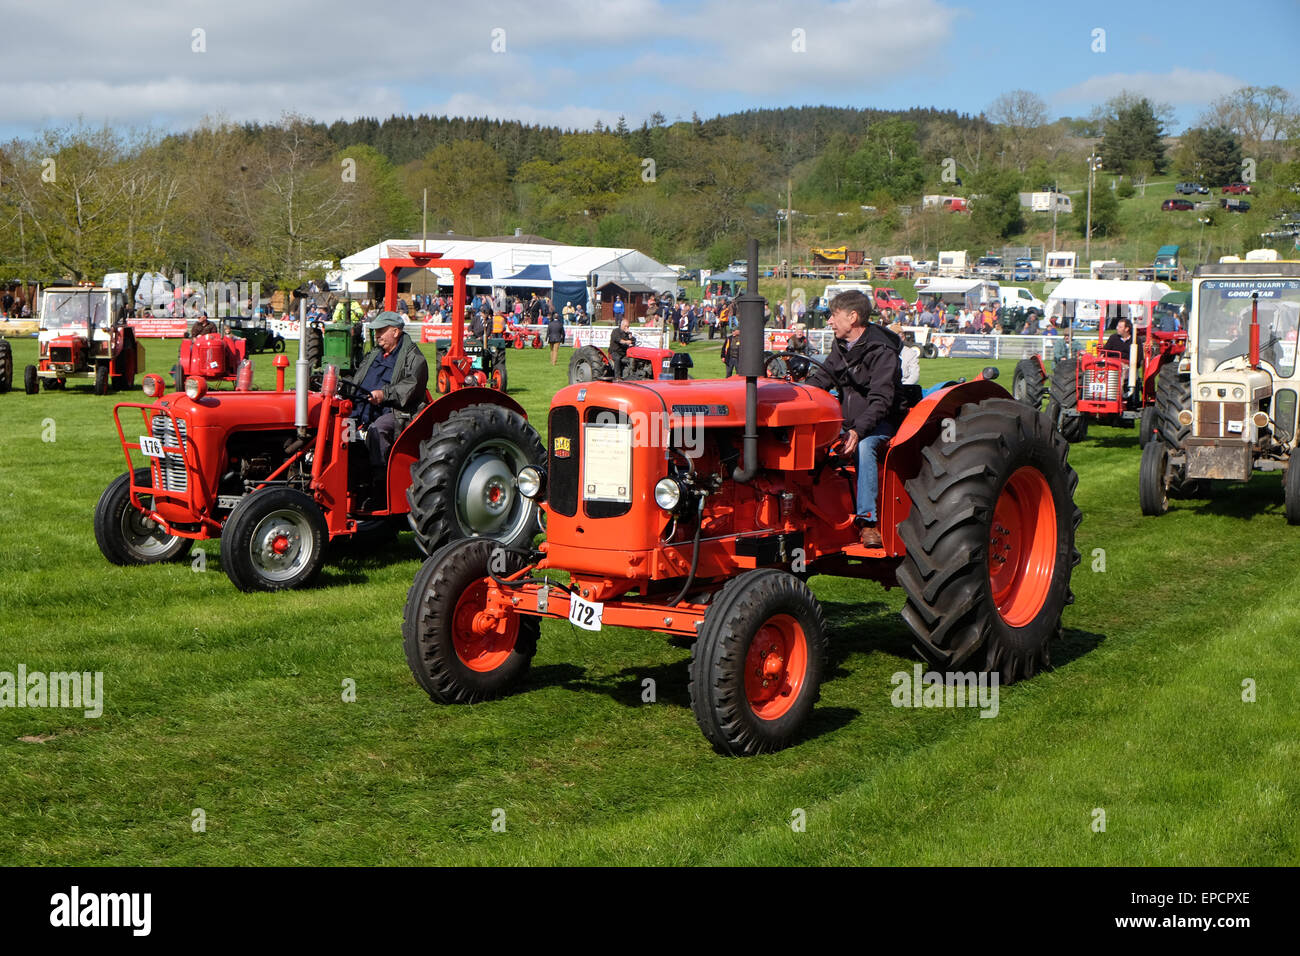 Royal Welsh Spring Festival Builth Wells, Powys, Wales, UK May 2015. Vintage tractors and vehicles display parade. Over 80 vehicles took part in the procession around the display arena including this 1967 Nuffield 10/85 tractor as afternoon sunshine shone on the rural festival showground at Builth Wells in mid Wales. Stock Photo